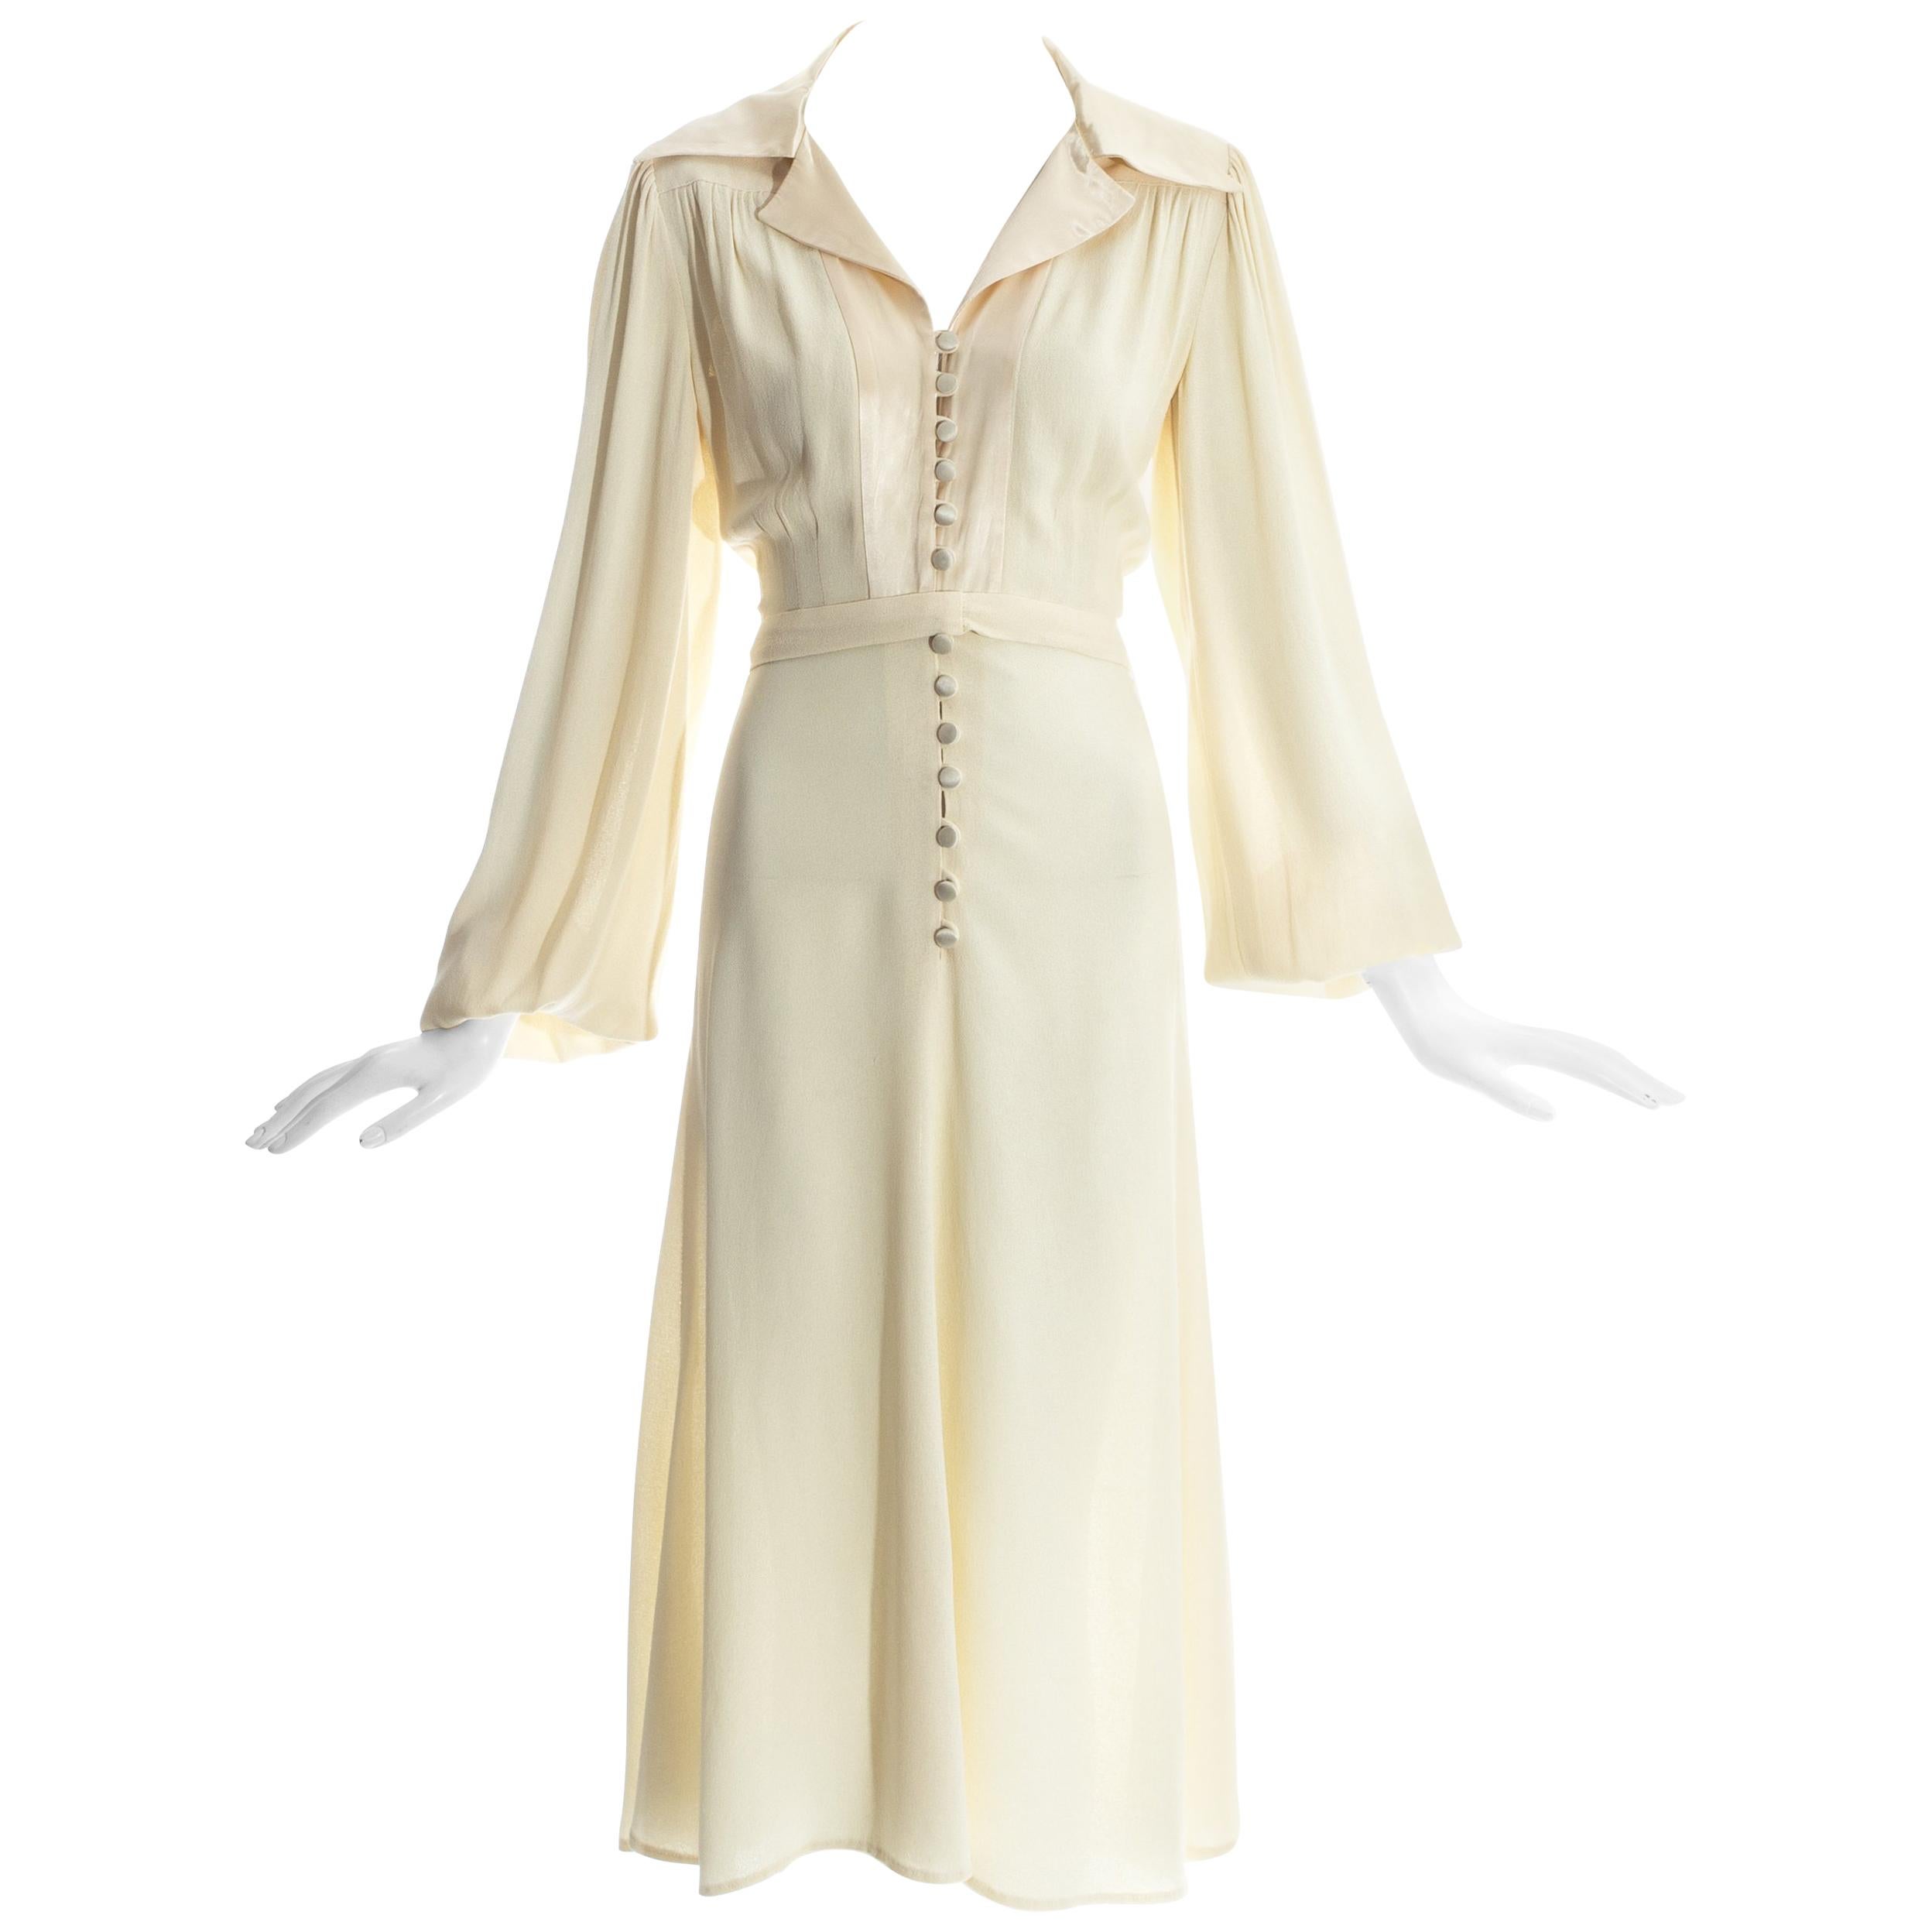 Ossie Clark cream moss crepe and satin button up dress, c. 1970